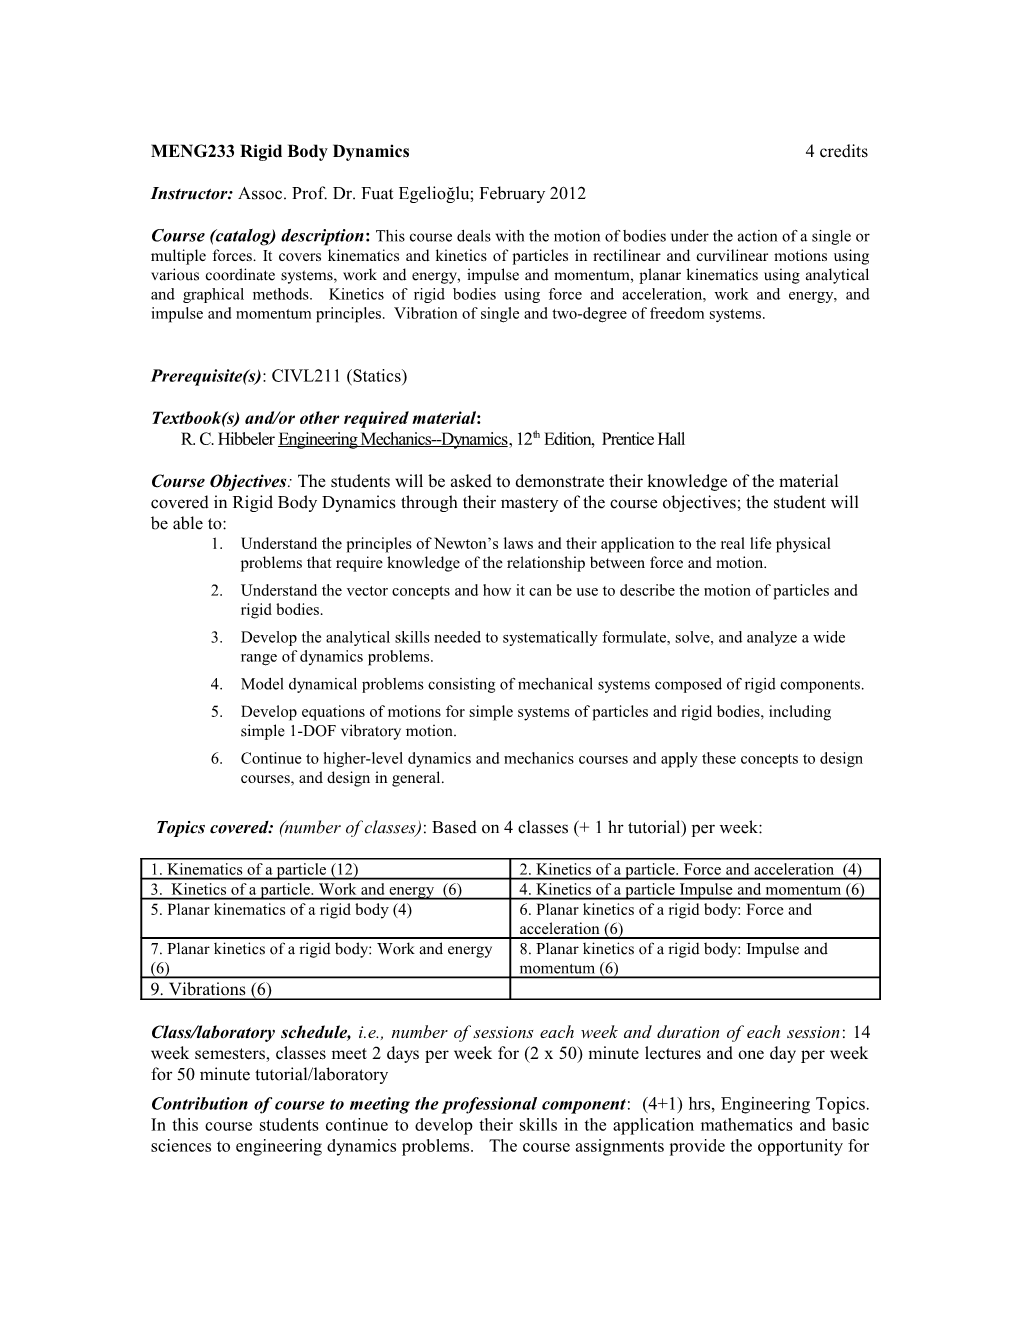 Examples of the ABET Two Page Syllabus